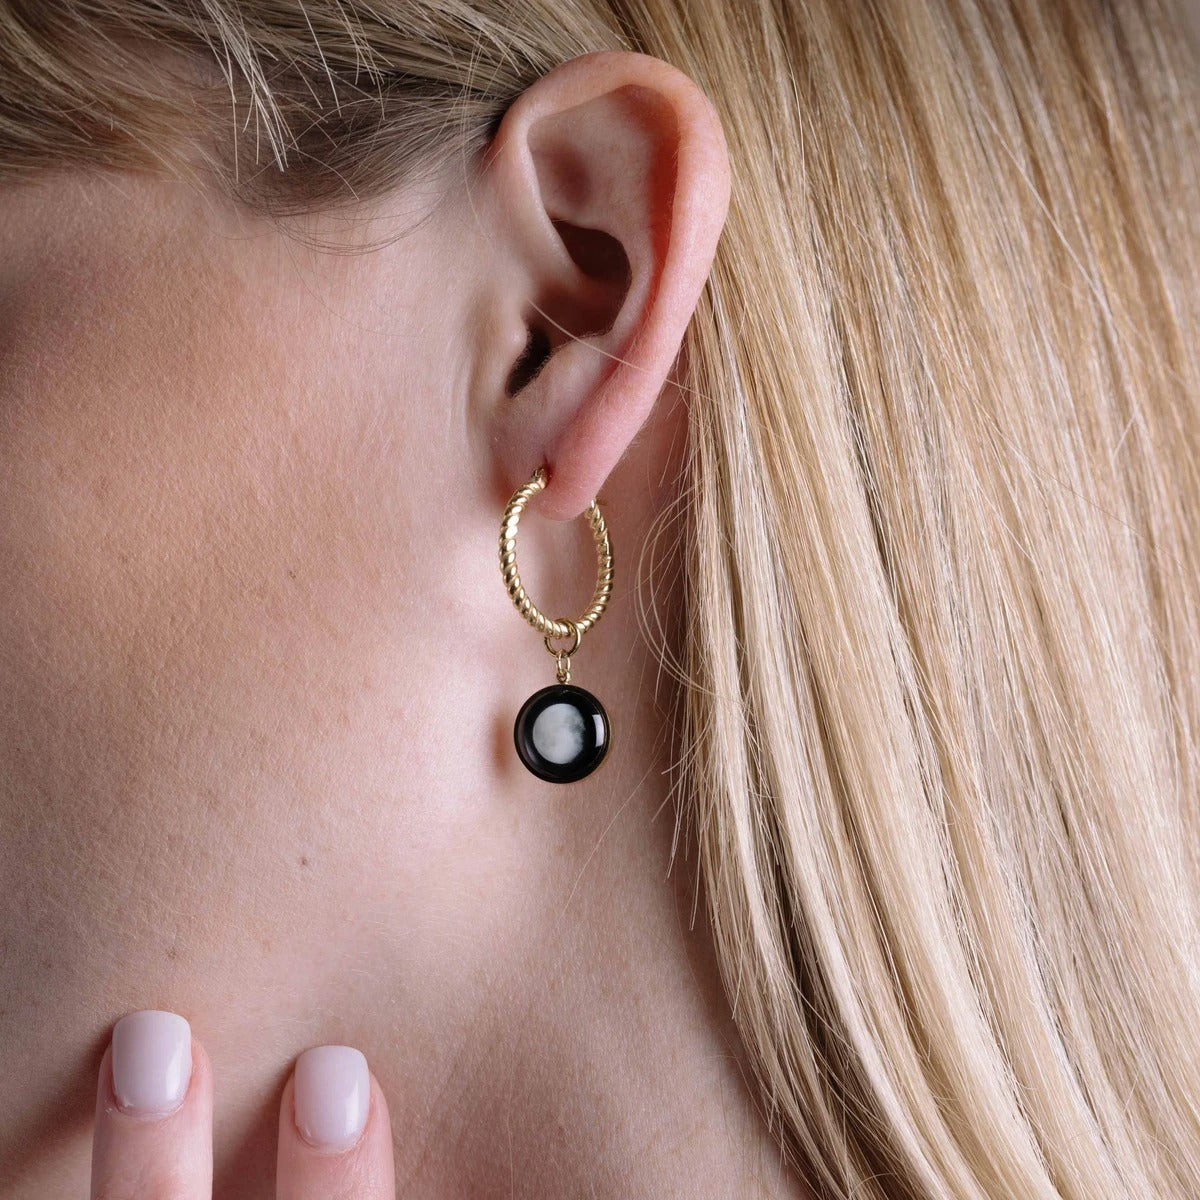 The Carina Hoops in Gold